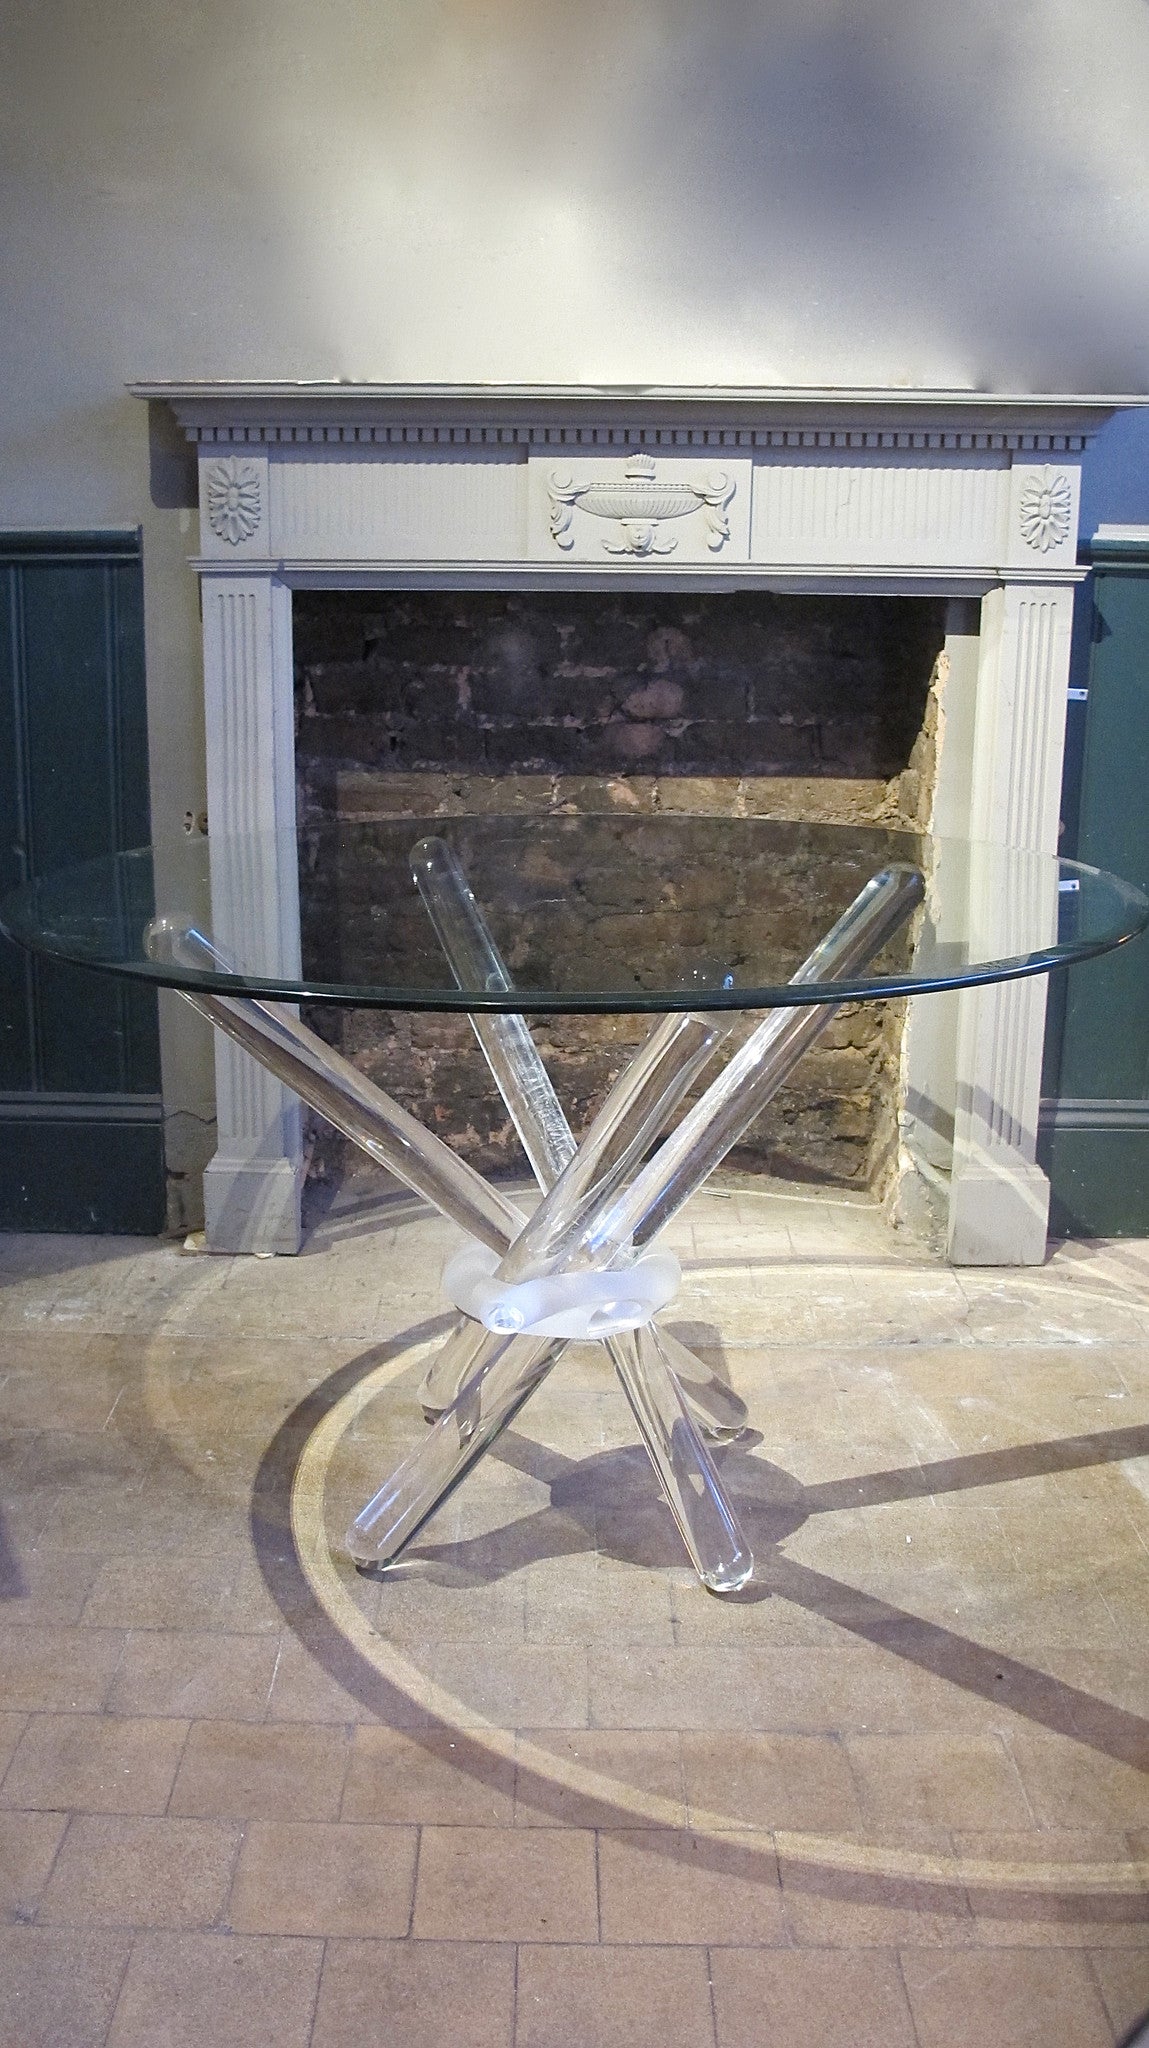 X A late twentieth century dinning table consisting of four solid glass legs held together with a glass ring.